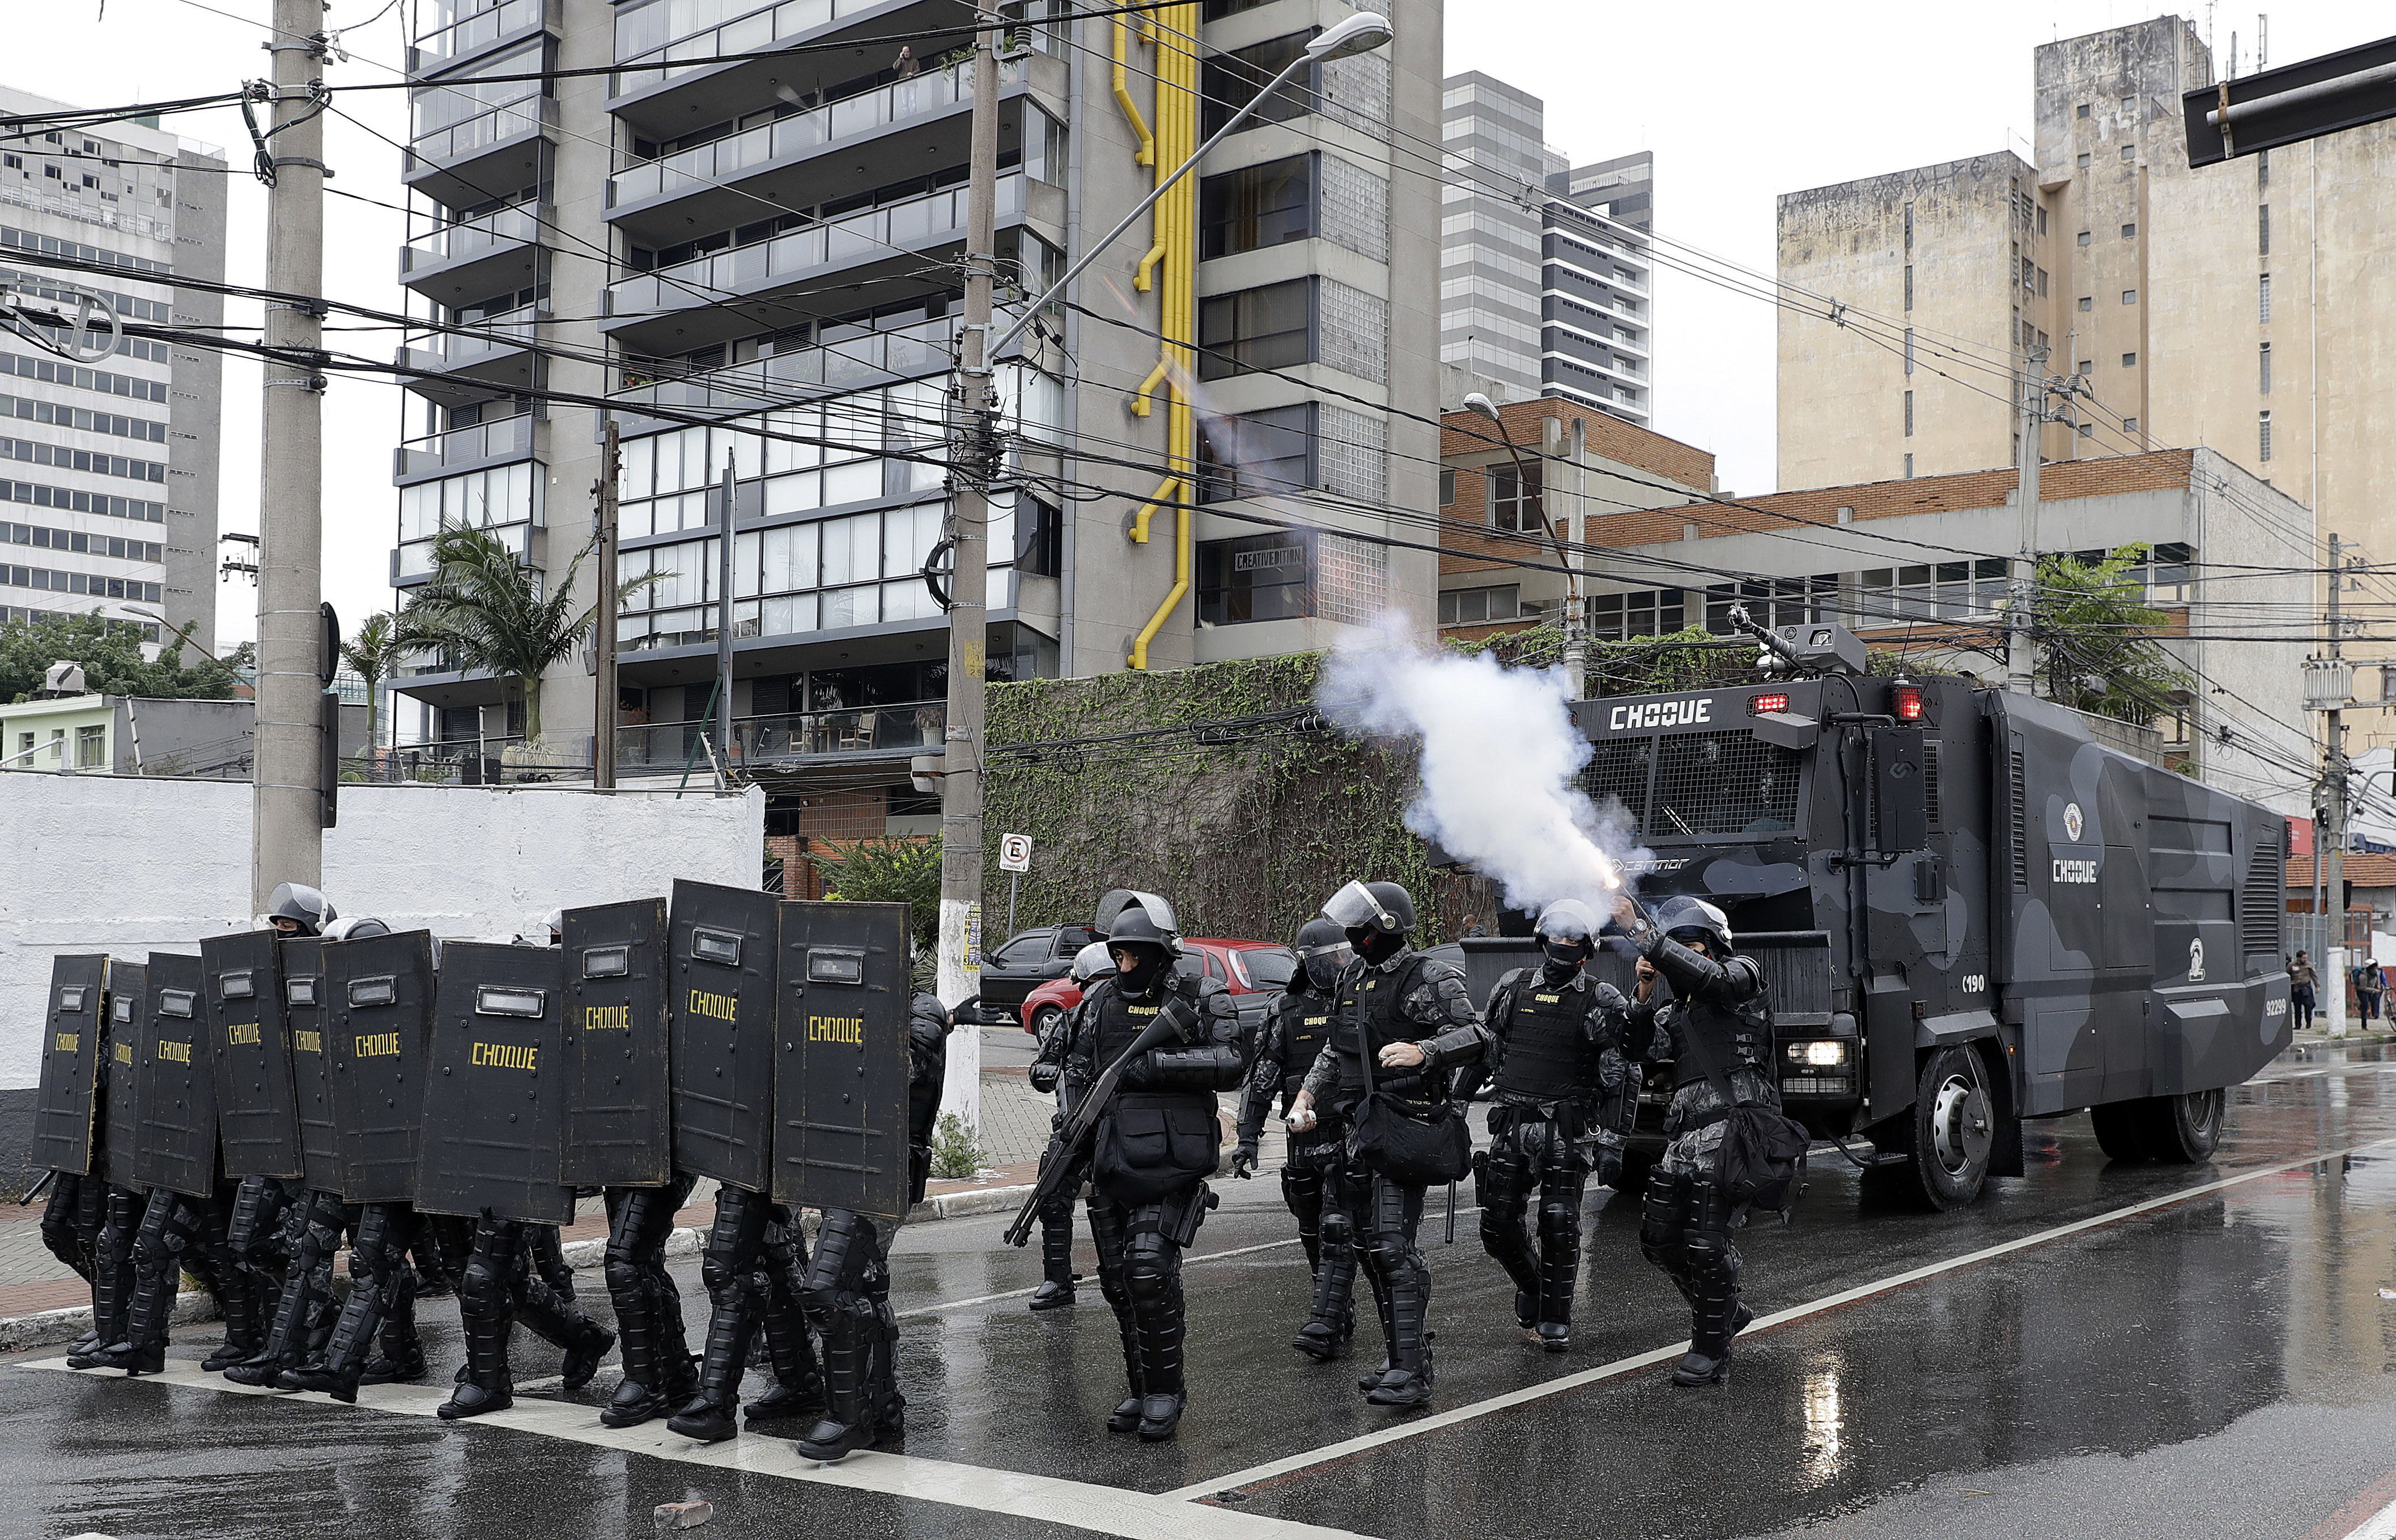 Riot police fire tear gas at demonstrators, next to the Sao Paulo's University, during a general strike in Sao Paulo, Brazil, Friday, April 28, 2017. Buses, trains and metros have been halted across much of Brazil as a general strike kicks off. Transportation unions and several other groups are protesting changes to labor laws and the pension system being considered by Congress. (AP Photo/Andre Penner)